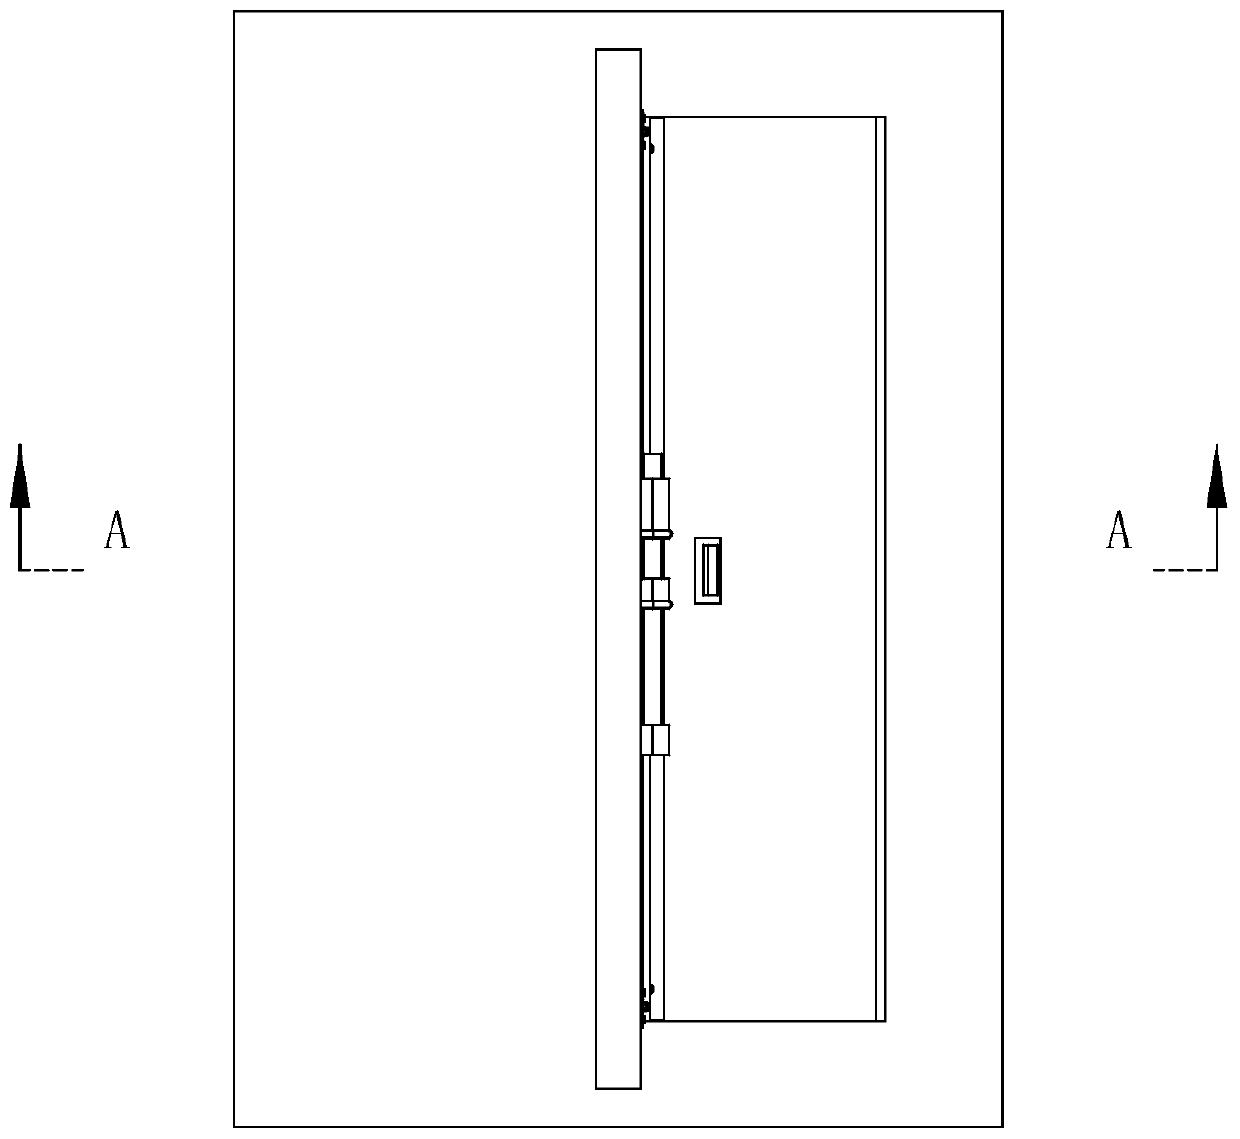 A double-leaf civil air defense door structure with living threshold